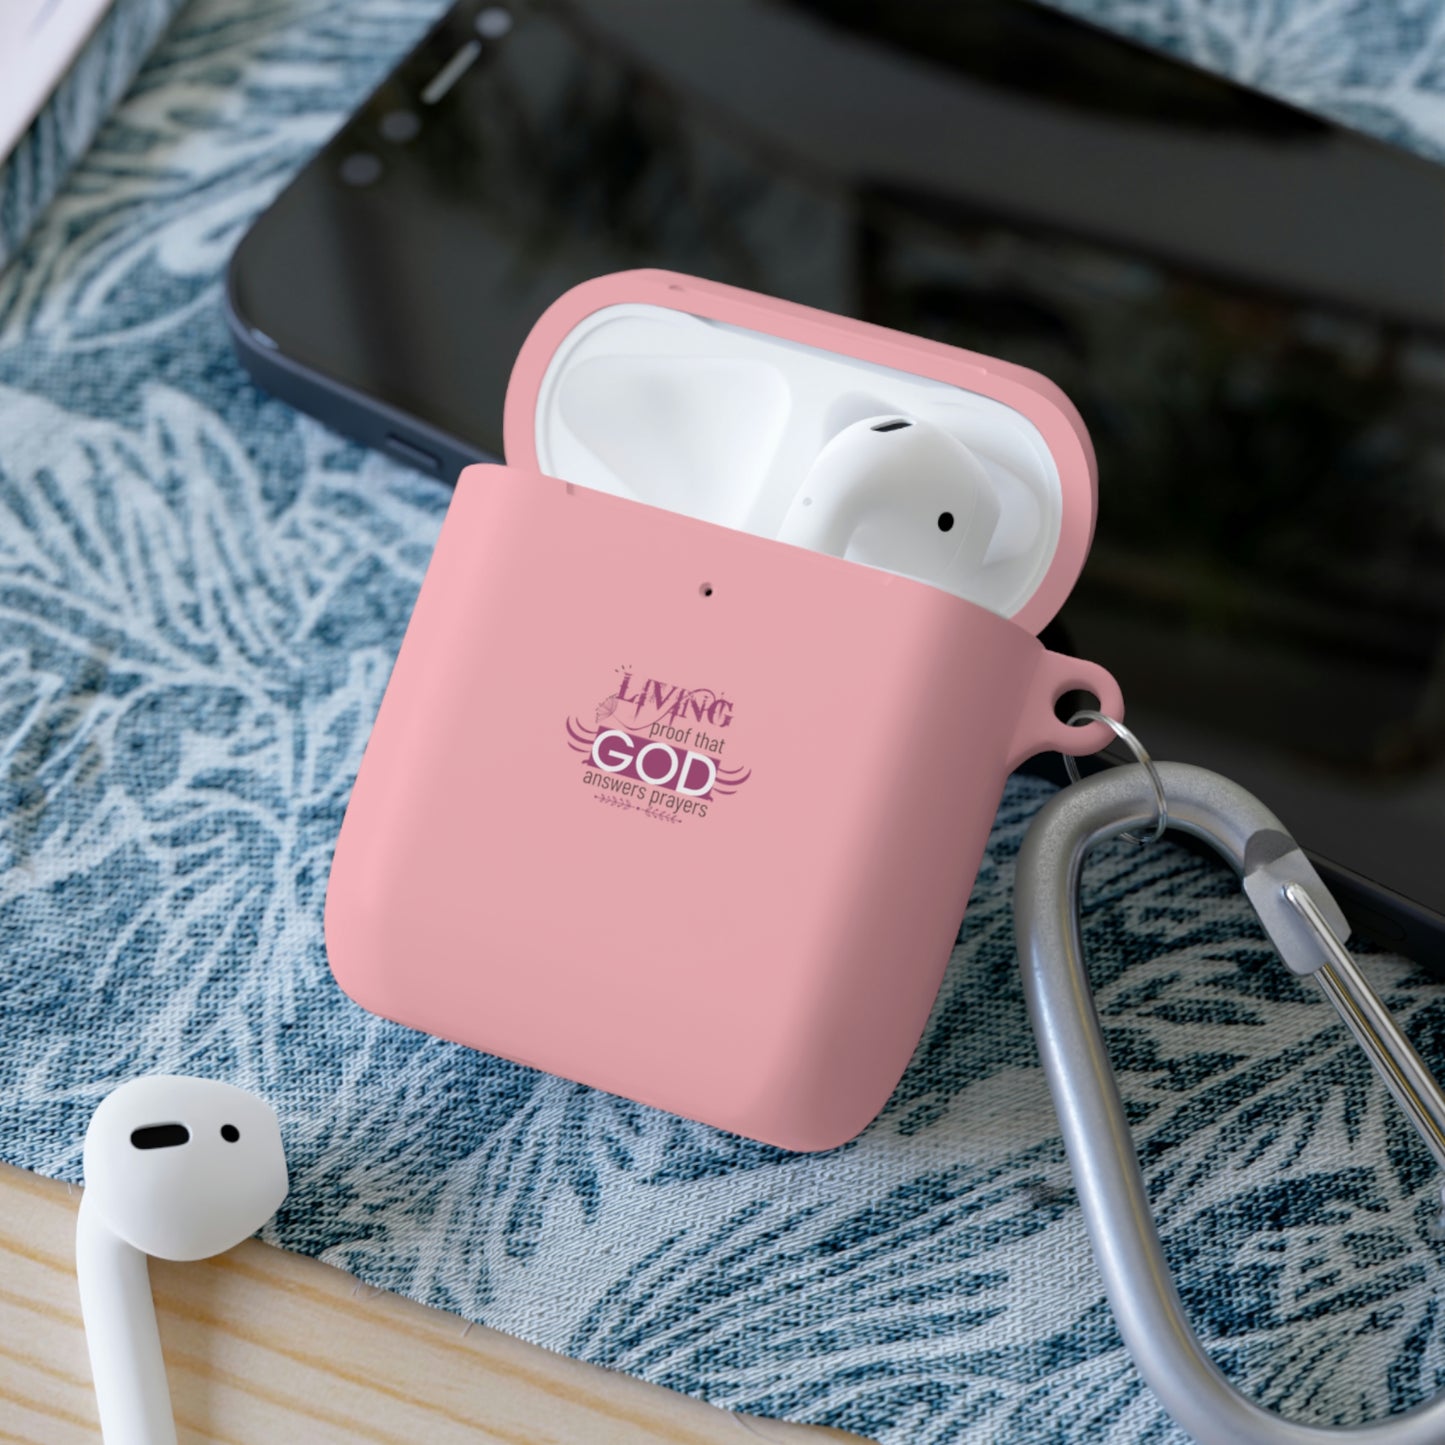 Living Proof That God Answers Prayers AirPods / Airpods Pro Case cover